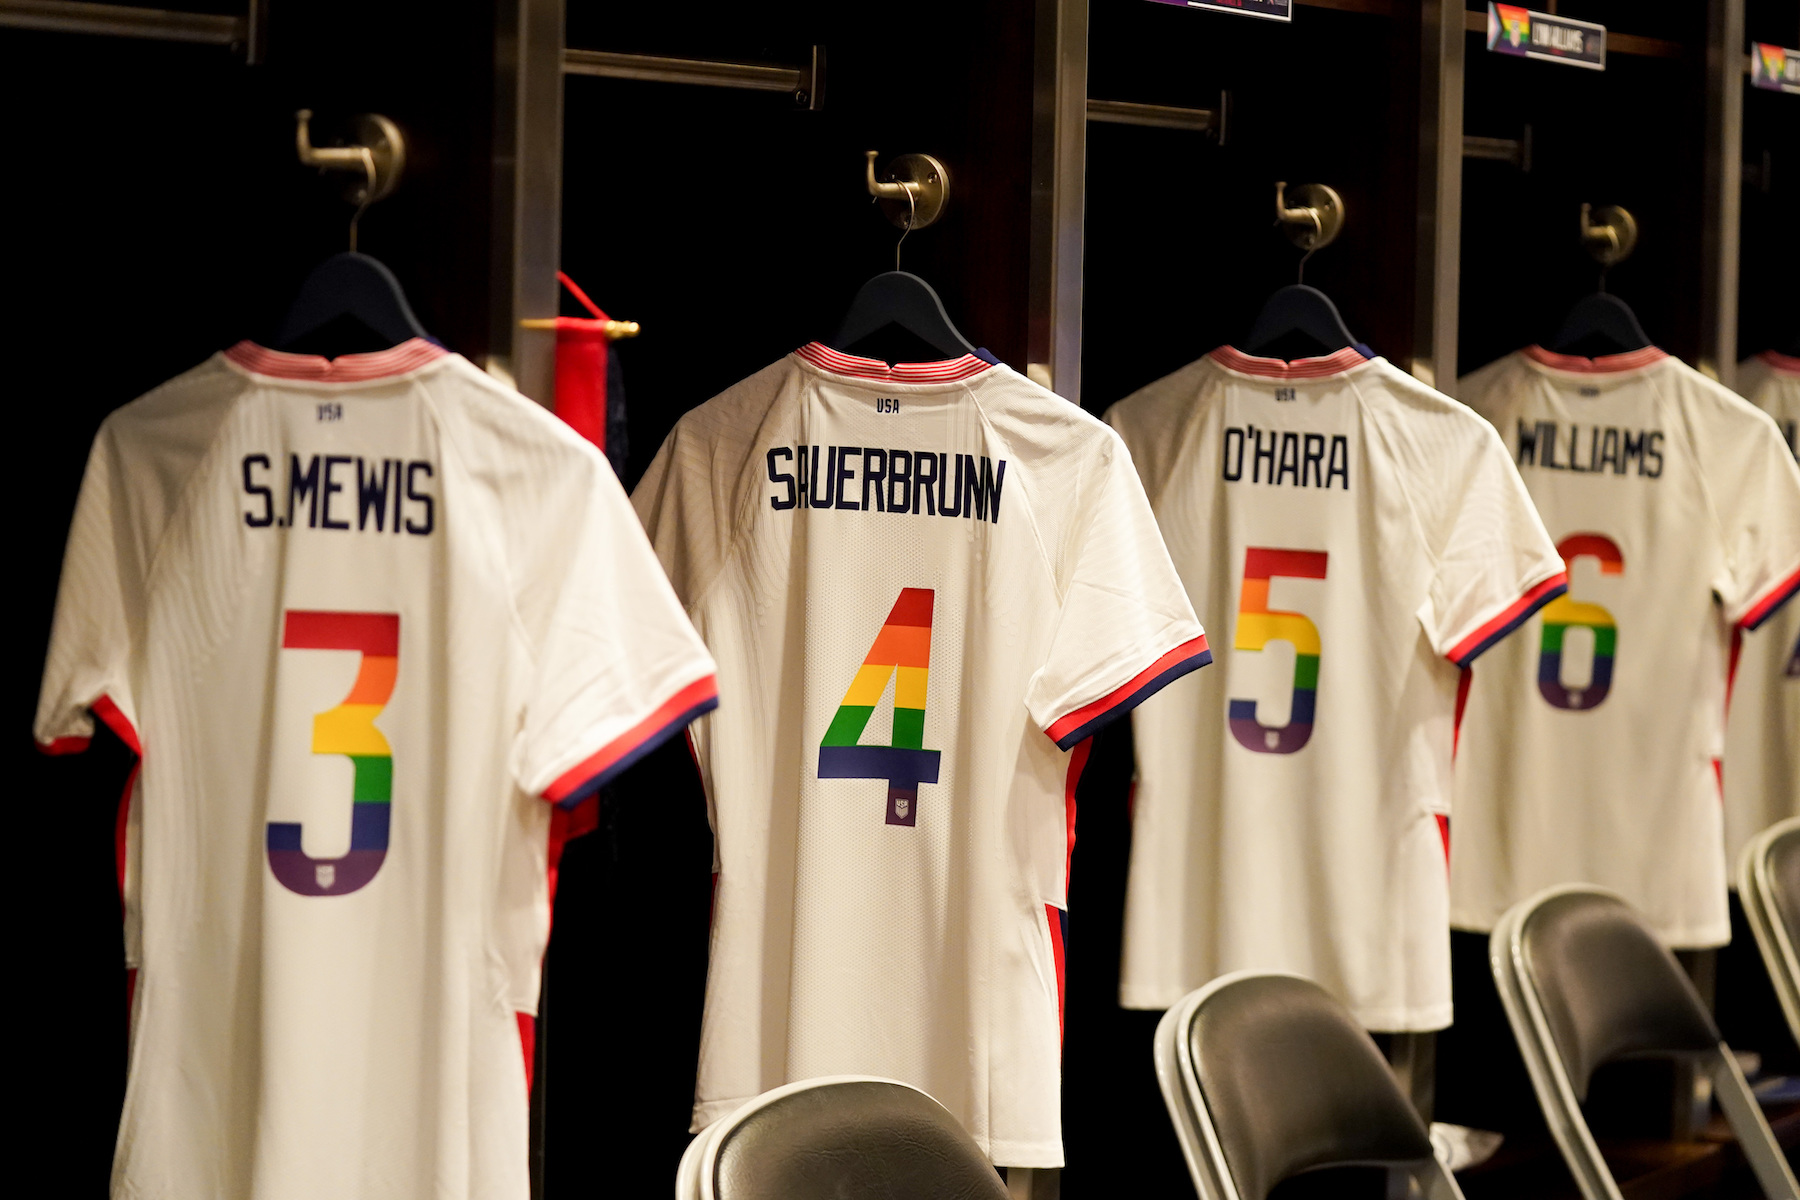 Be the Change': Pride flag made part of US Soccer's World Cup team